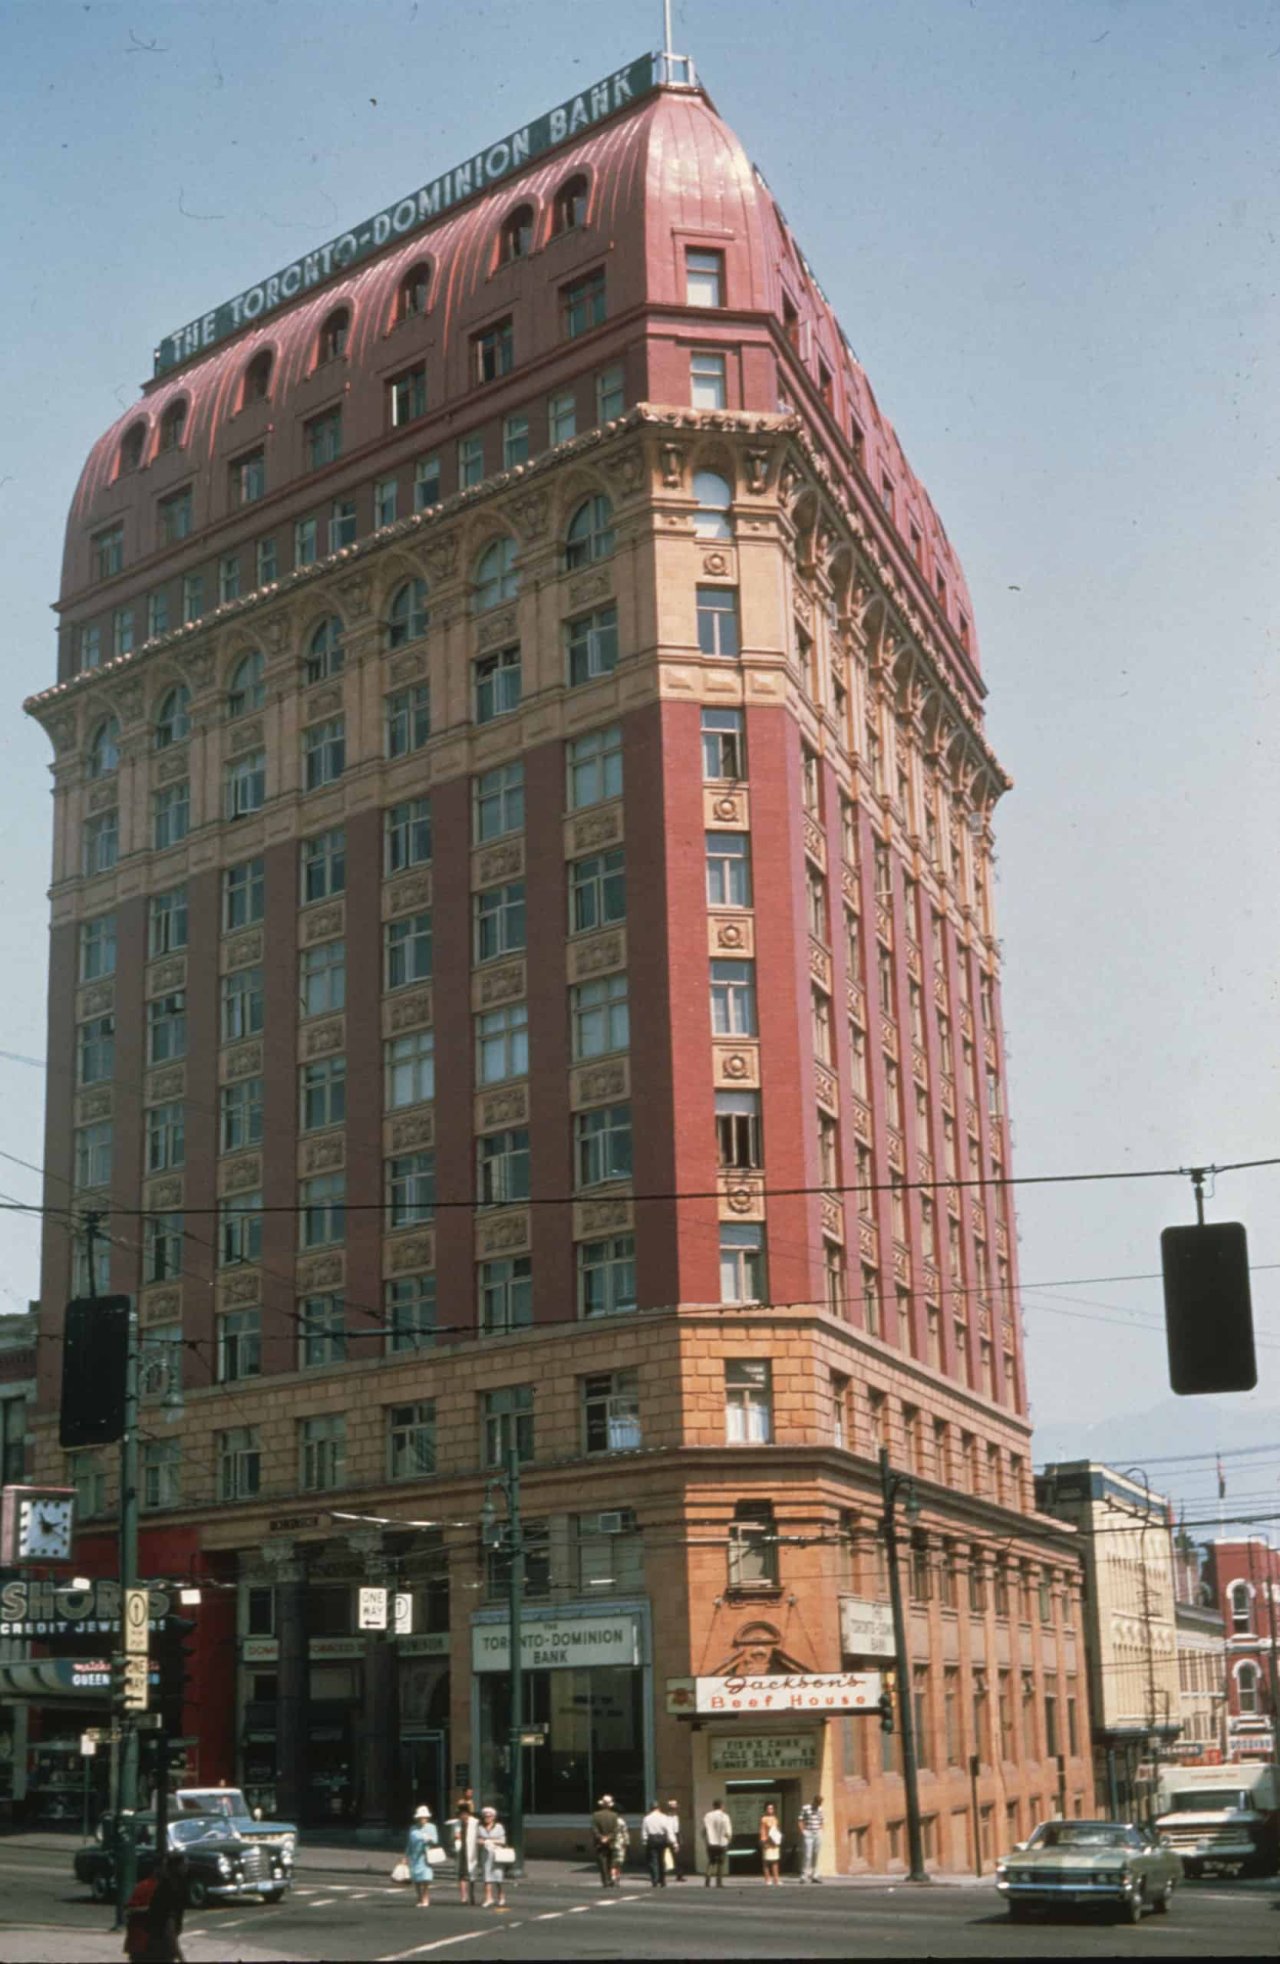 The Dominion Building in 1969. Source: City of Vancouver Archives 1135-13.